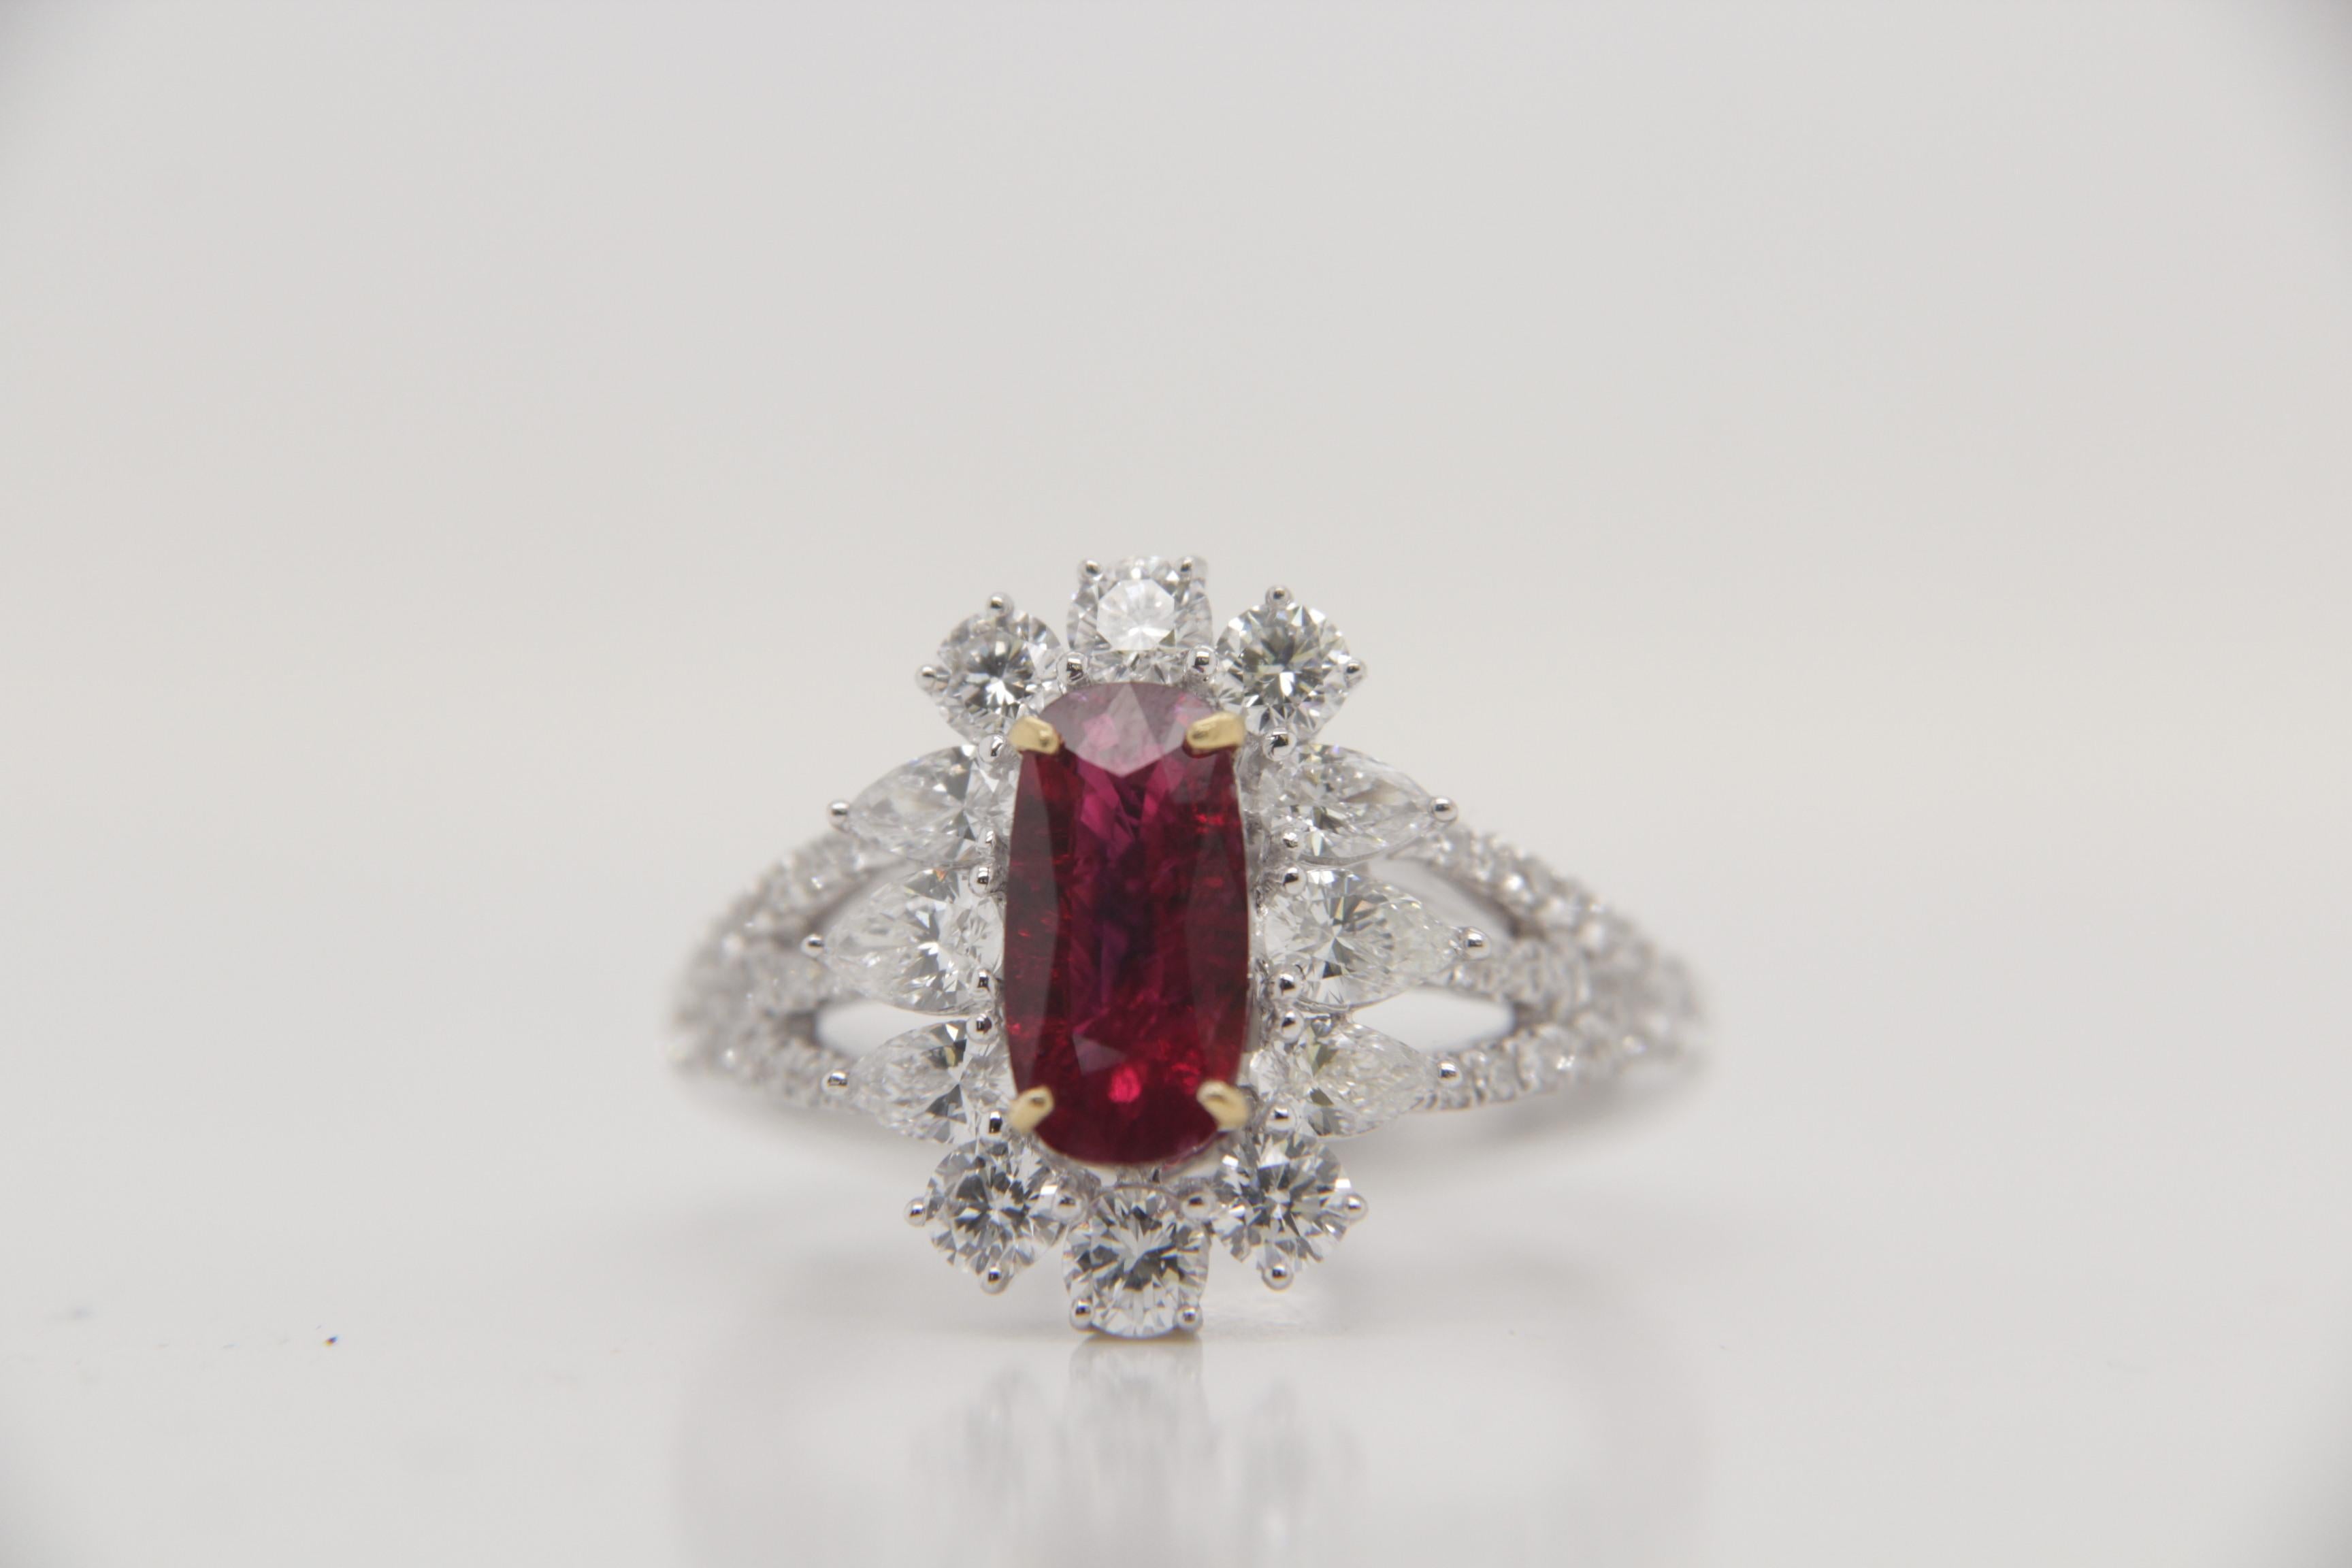 A brand new handcrafted ruby ring by Rewa Jewels. The ring's center stone is 1.22 carat Burmese ruby certified by Gemological Institute of America (GIA) as natural, unheated, 'Pigeon blood' with the certificate number: 2457185265. The centre ruby